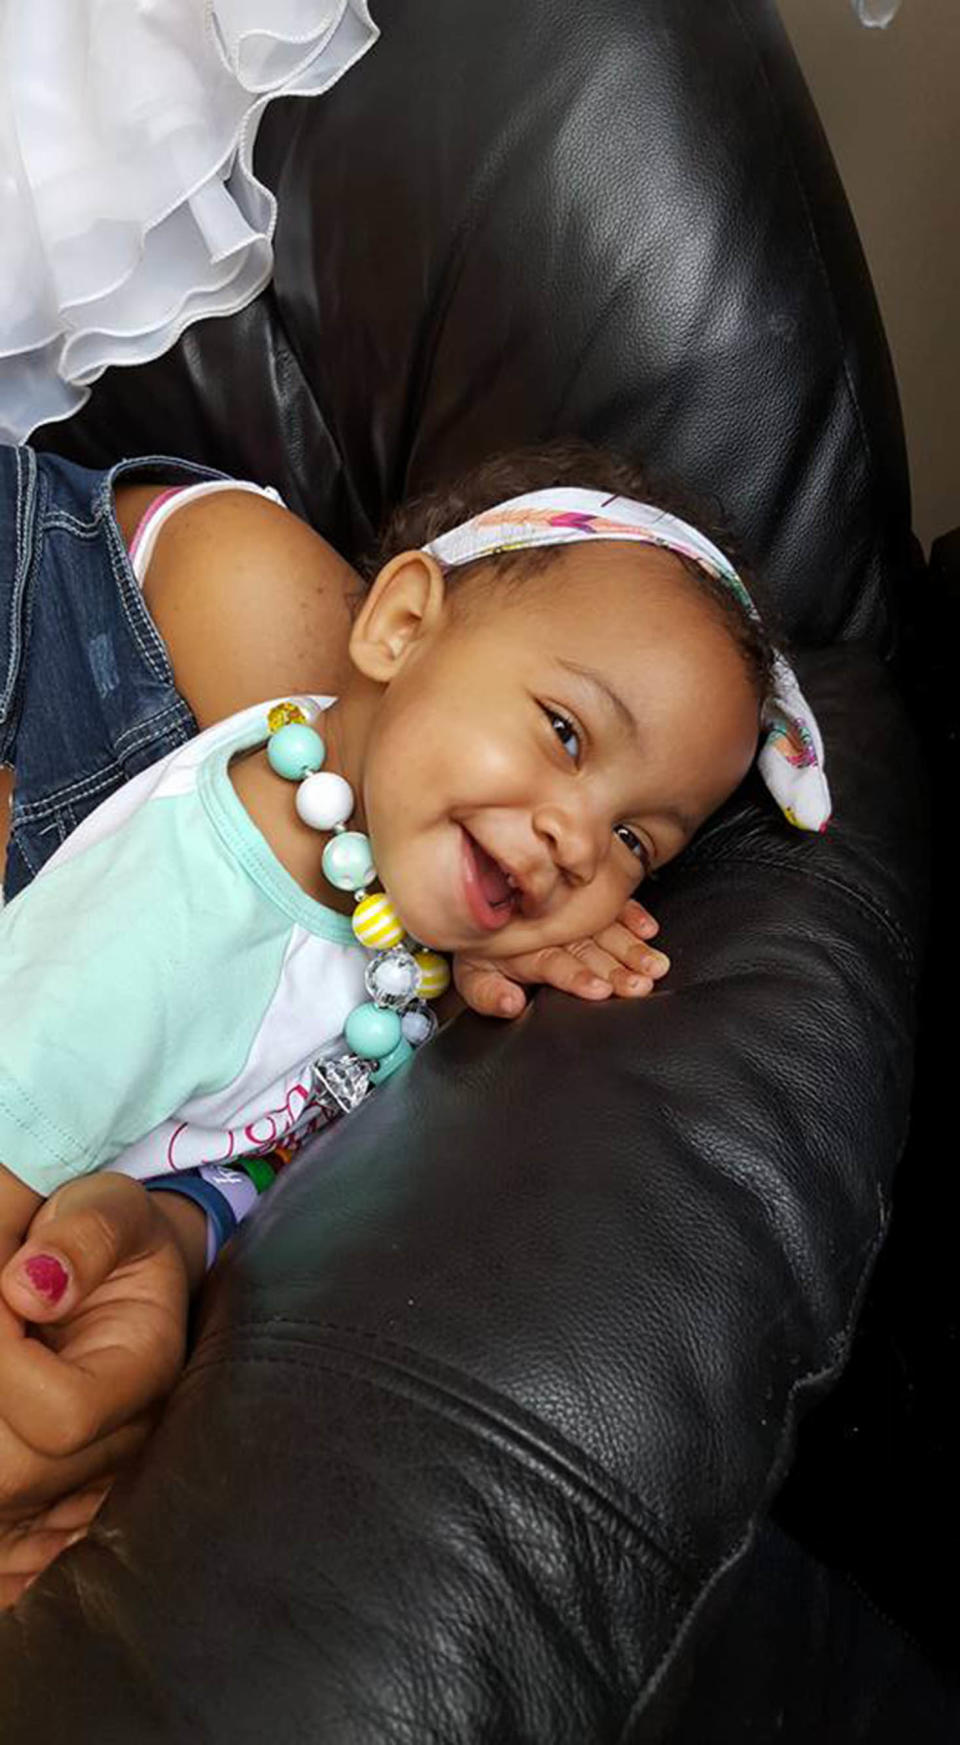 "Our daughter, Azariah, was dignosed with bilateral Wilms tumor on June 9, 2015 at 10 weeks old. She had 12 weekly rounds of chemo (VAD) and surgery on September 22, 2015, through which they where able to save most of her right kidney and one third of her left. She's been cancer free since November. <br /><br />She suffered a bowel obstruction (an unfortunate side effect of her abdominal surgery) in January of this year when we she went septic. <strong>We almost lost her twice, once due to the sepsis and then again due to her temporary central line dislodging and fluids causing her to swell so much it was restricting her airway</strong>. Happy to say that today she is doing amazing and is full of wonder! She makes us laugh every single day!" -- Sarah Omari Idaeho